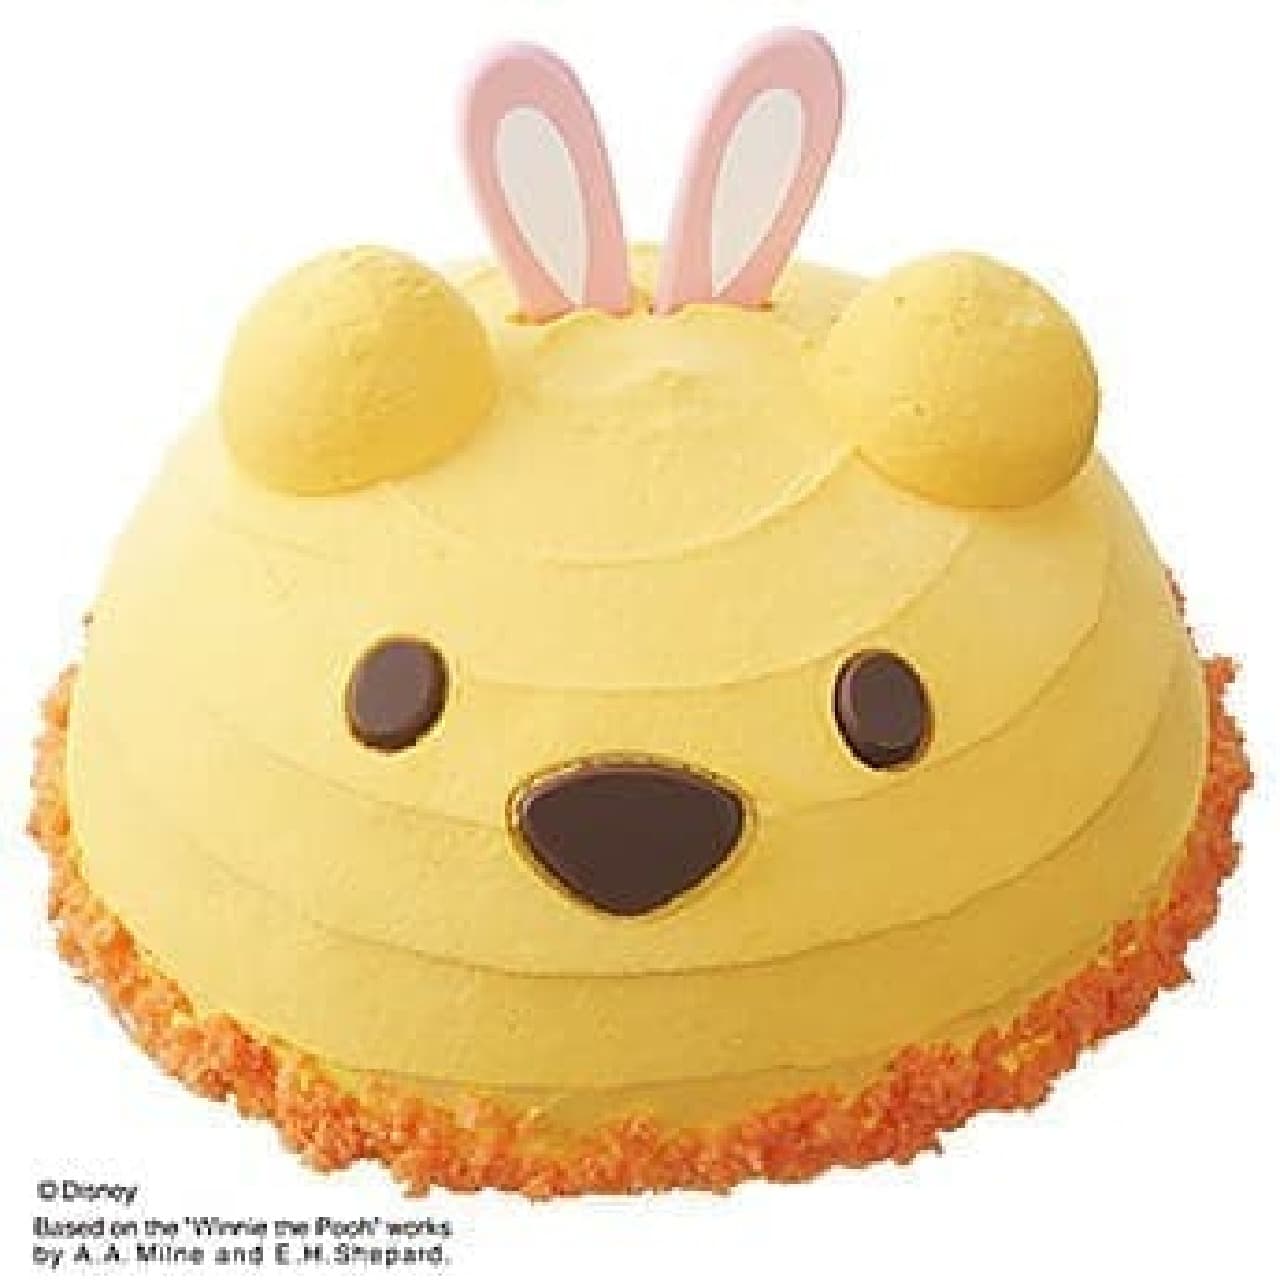 Easter sweets are here! (The image is "Easter Winnie the Pooh")